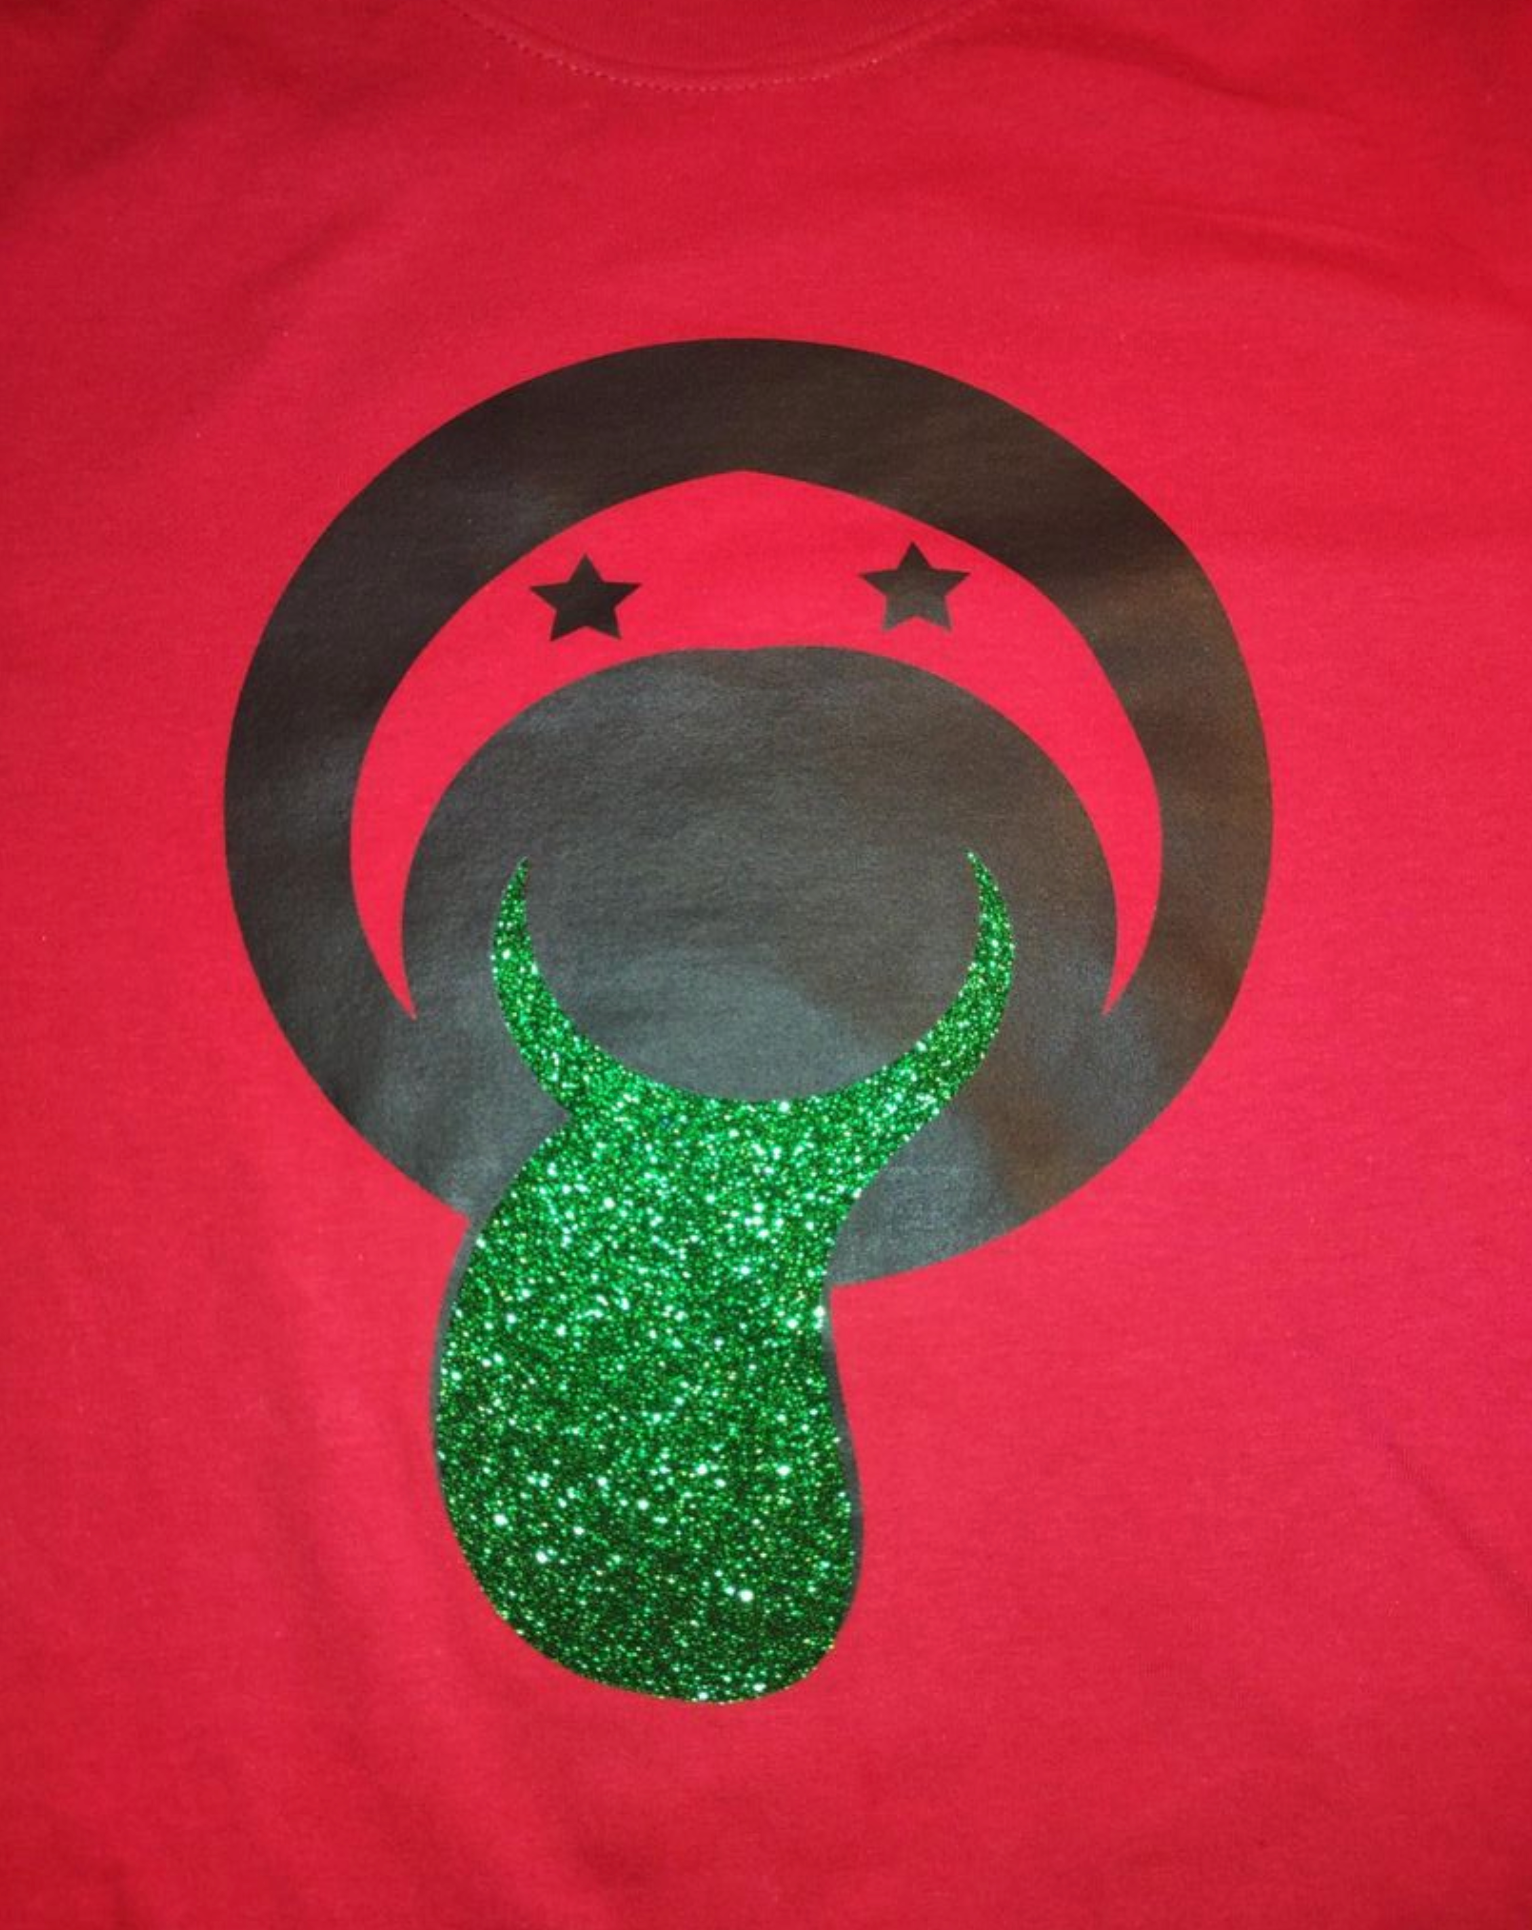 New Bucaleany "Toungeleany Green " Tshirt